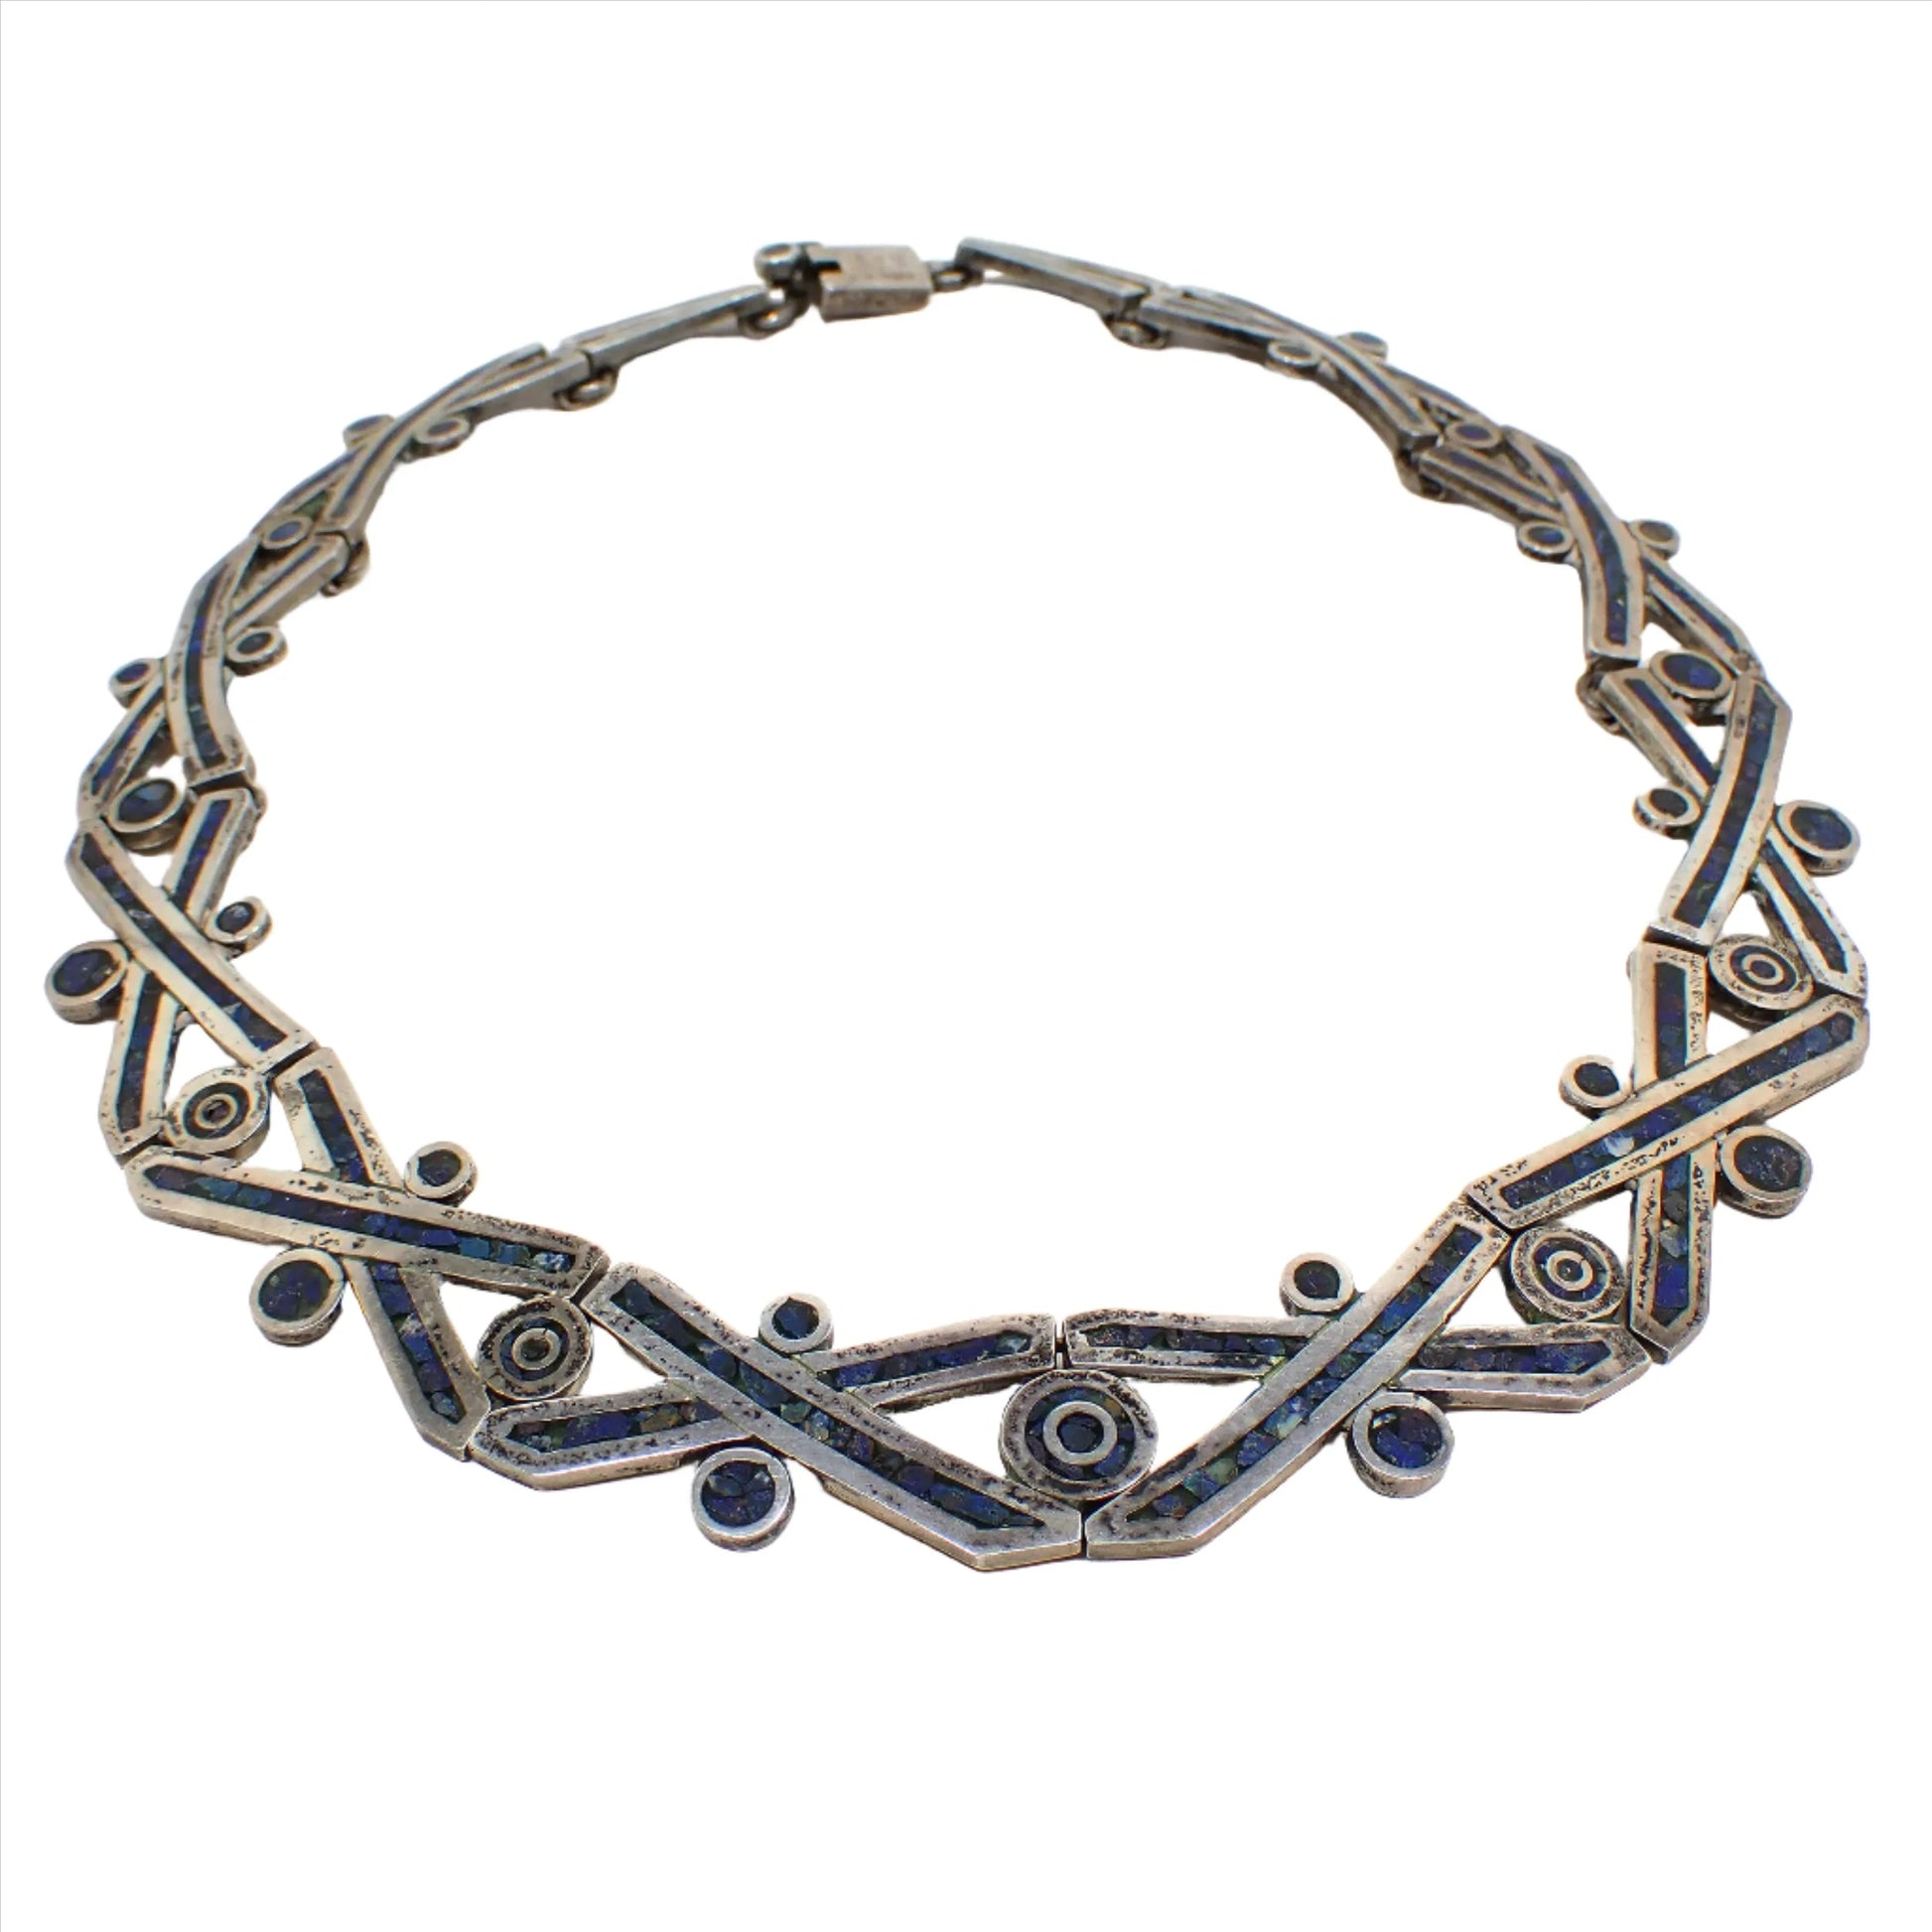 Angled front view of the retro vintage Taxco sterling silver link necklace. The necklace has longer style links that are shaped like X's with a dot above, below, and in between. Each piece has inlaid lapis lazuli gemstone chips that are dark blue in color. The sterling silver is darkened from age for a gray color with some small areas of black. There is a slide lock clasp at the end.